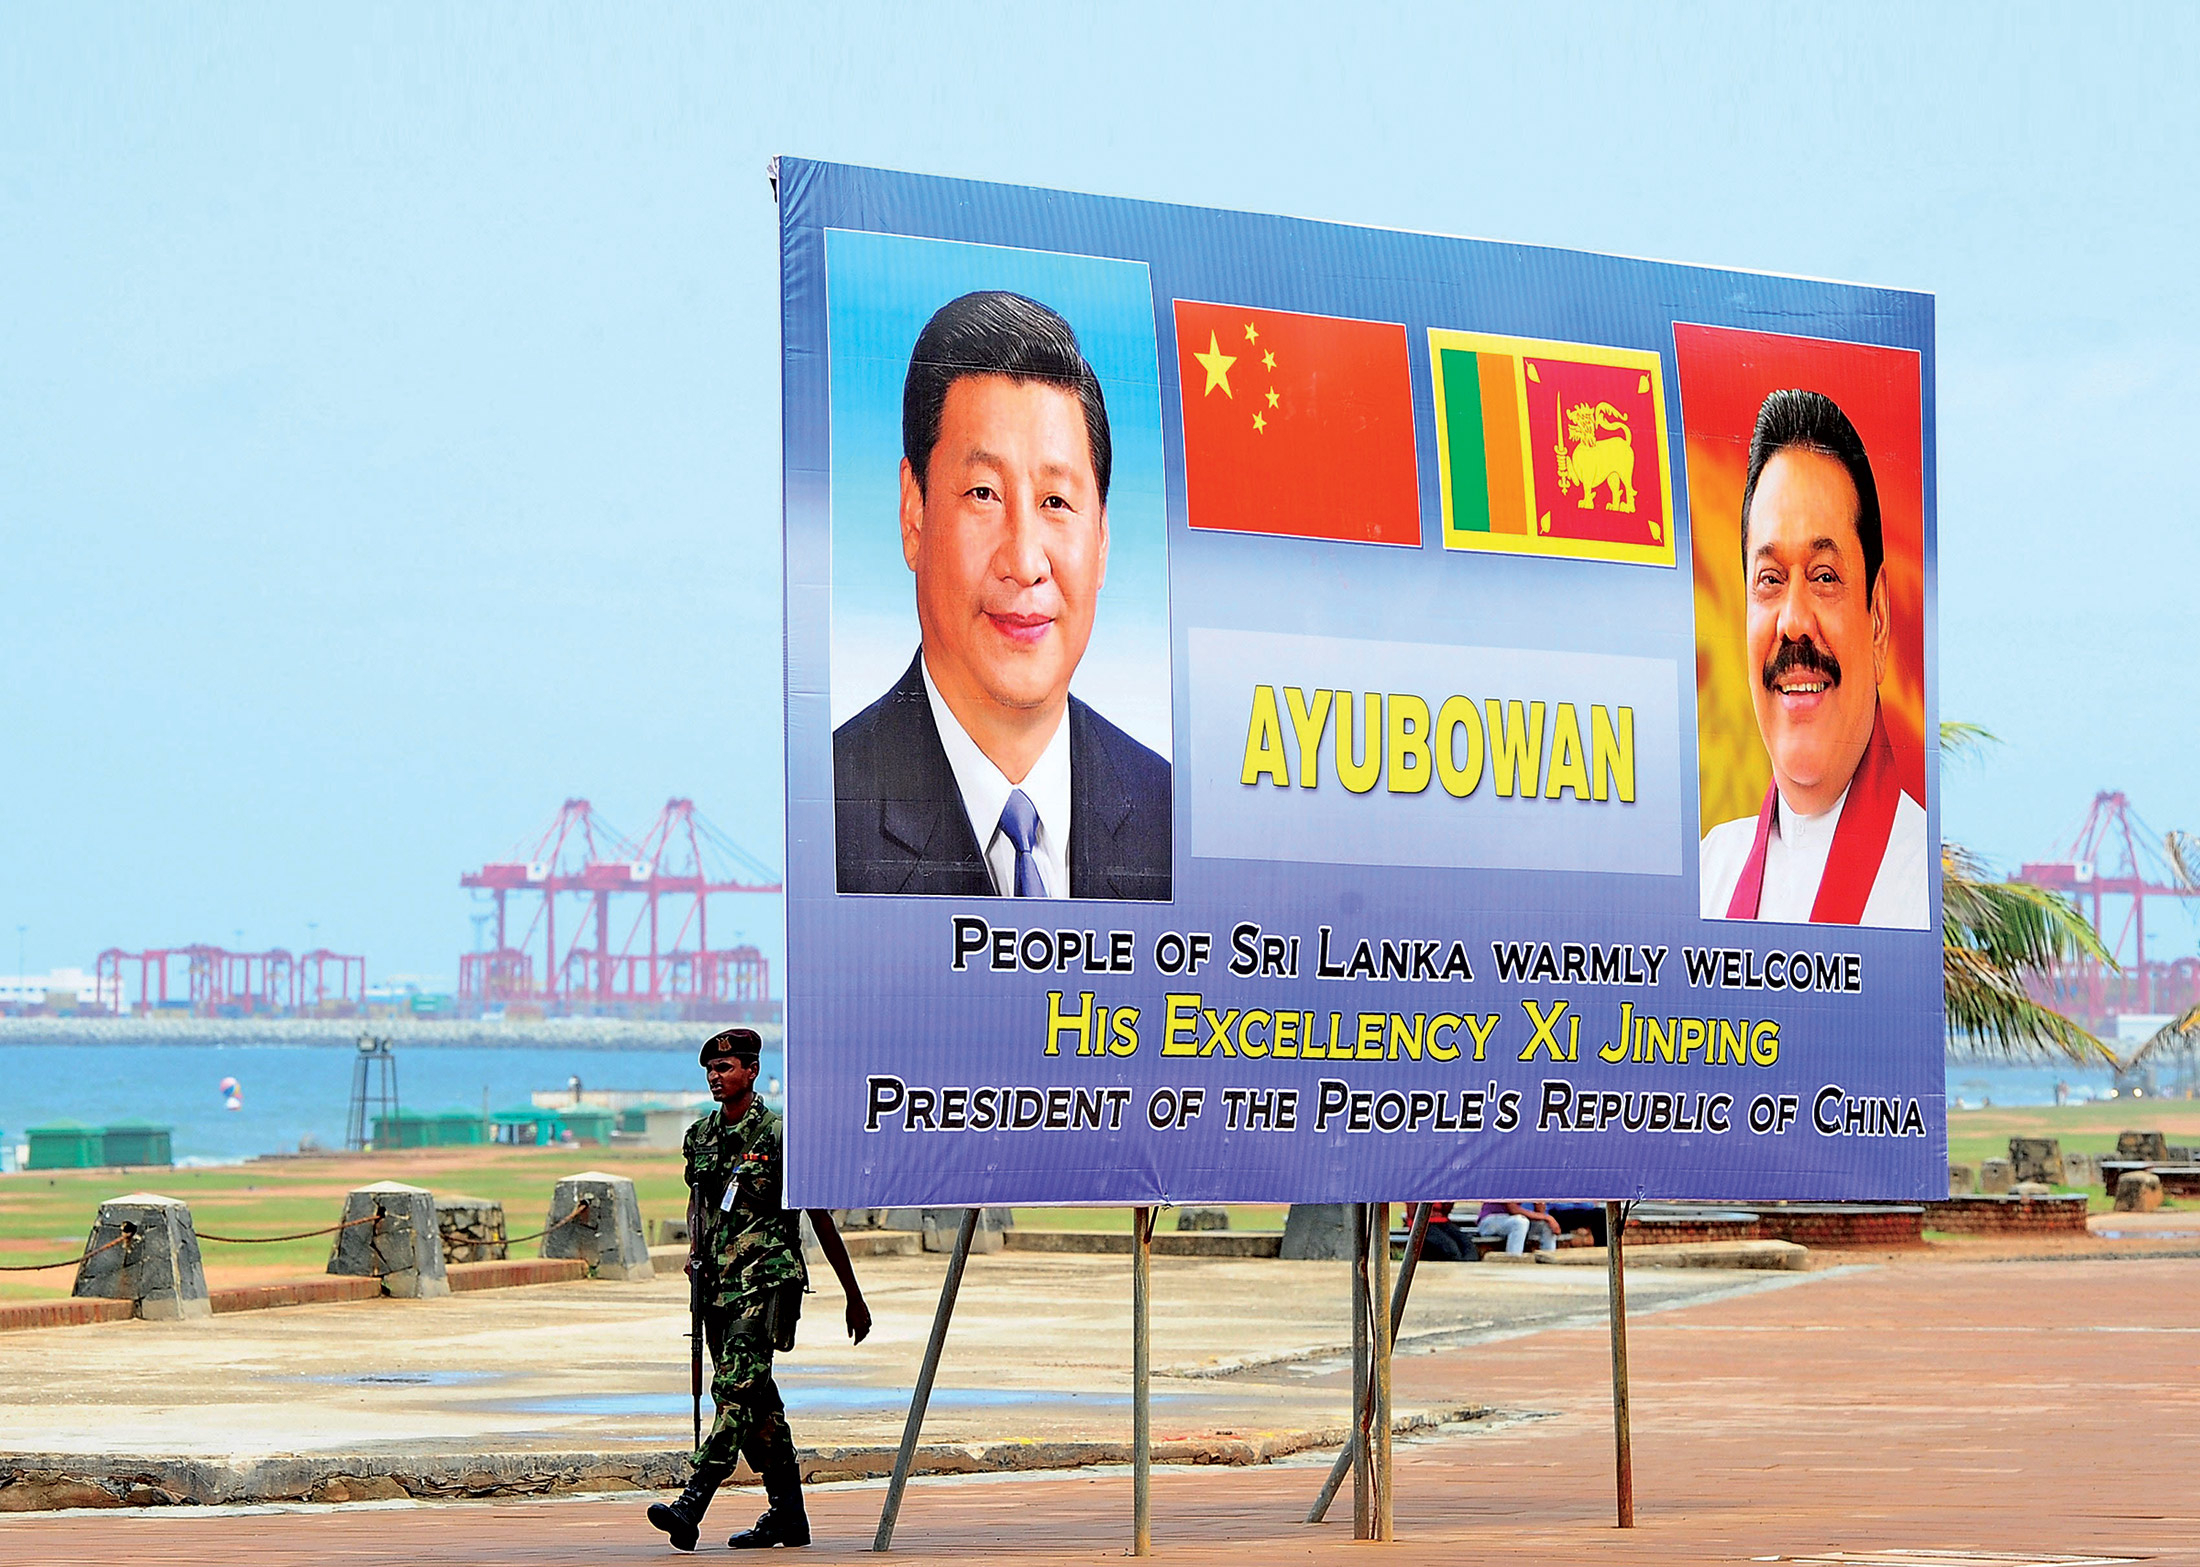 A poster in Sri Lanka welcomes China’s president after a succesful development project